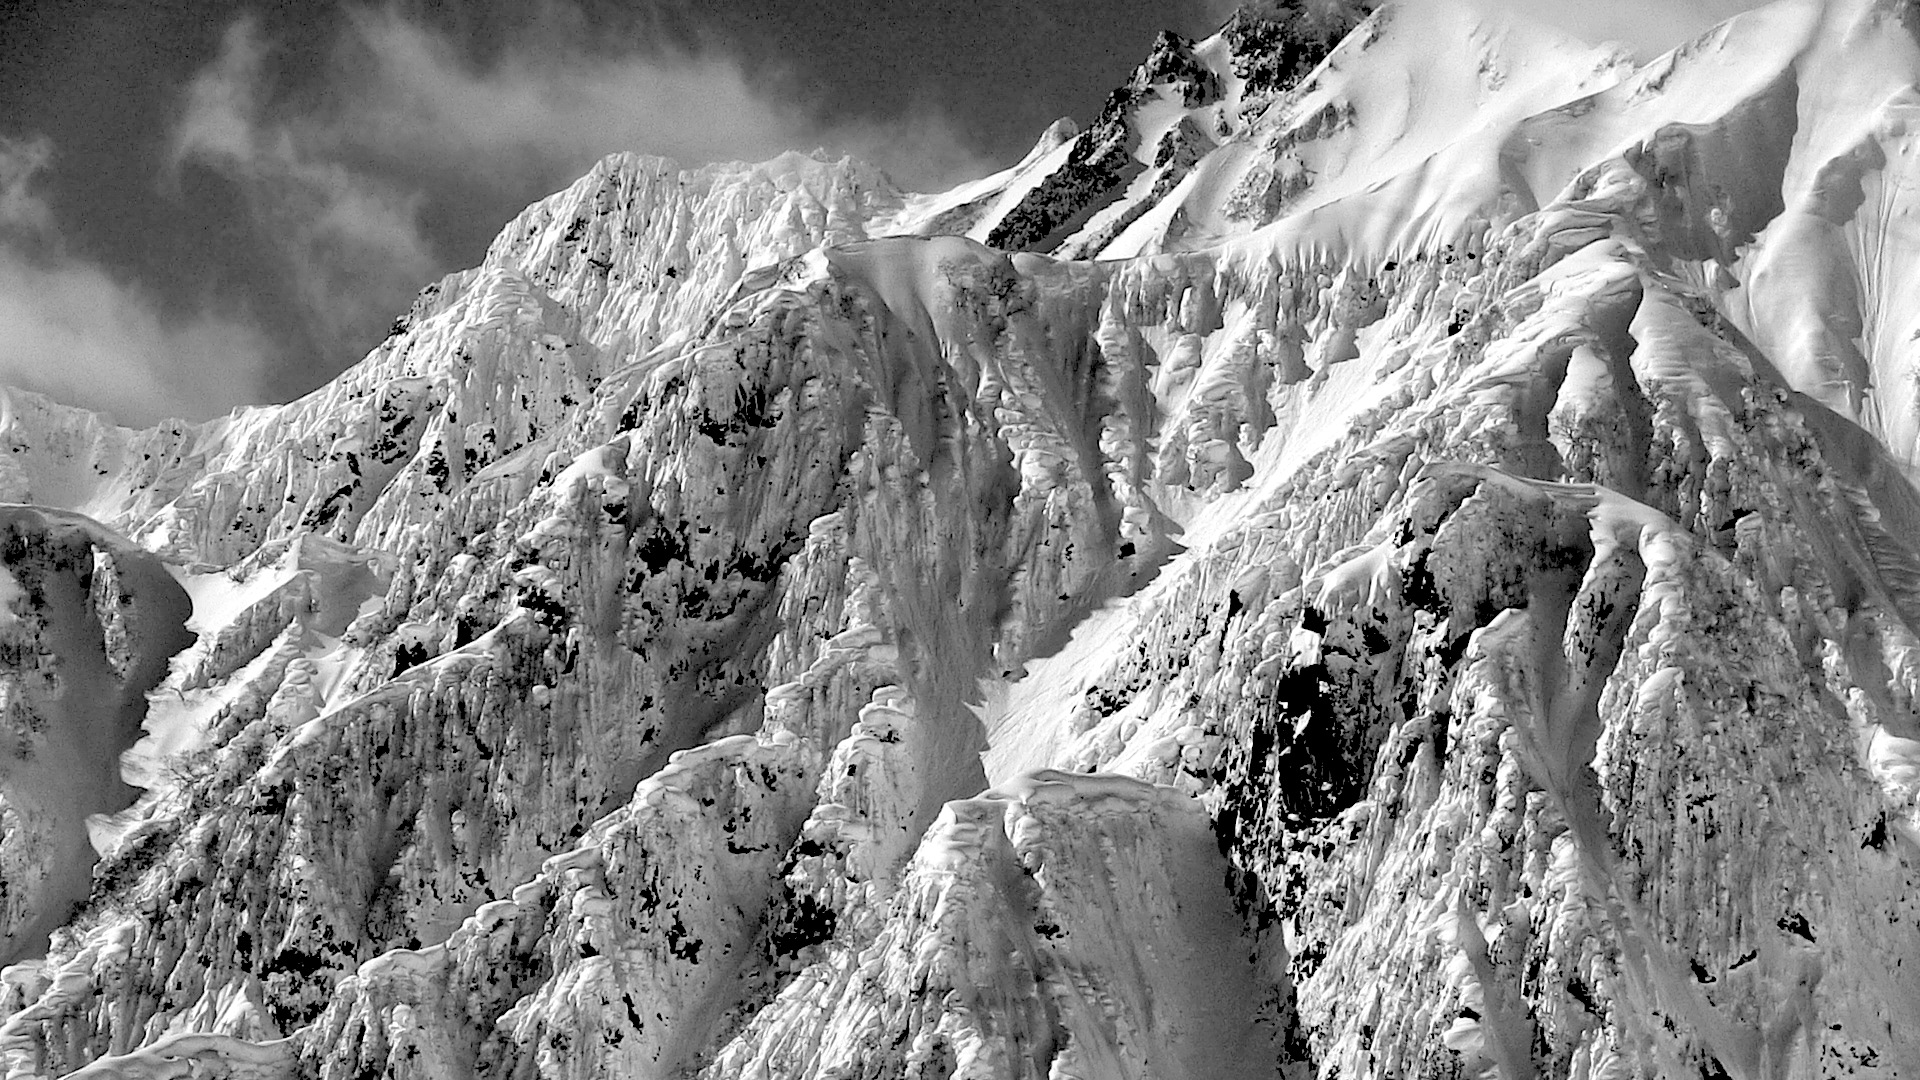 The mountains of Hakuba, Japan are for real. photo: miles clark/snowbrains